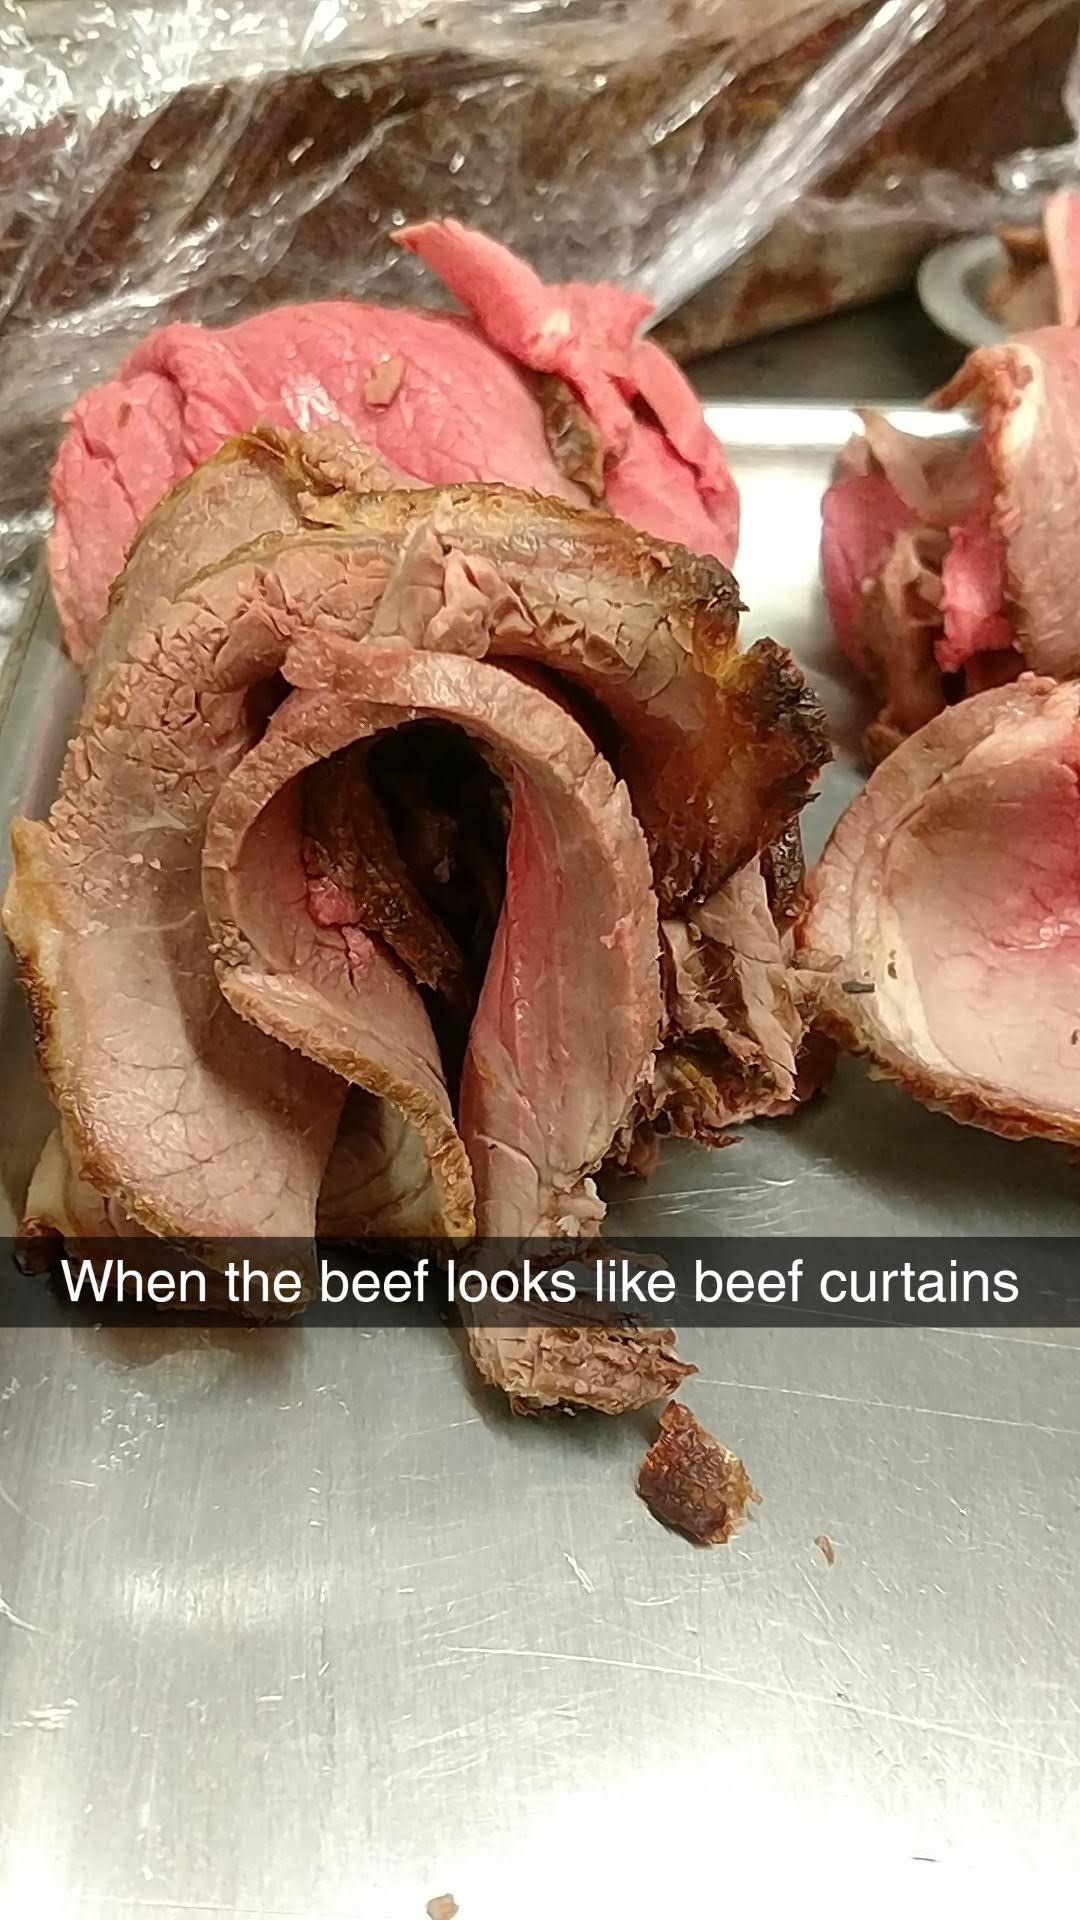 andrew mittleman share roast beef curtains pics photos